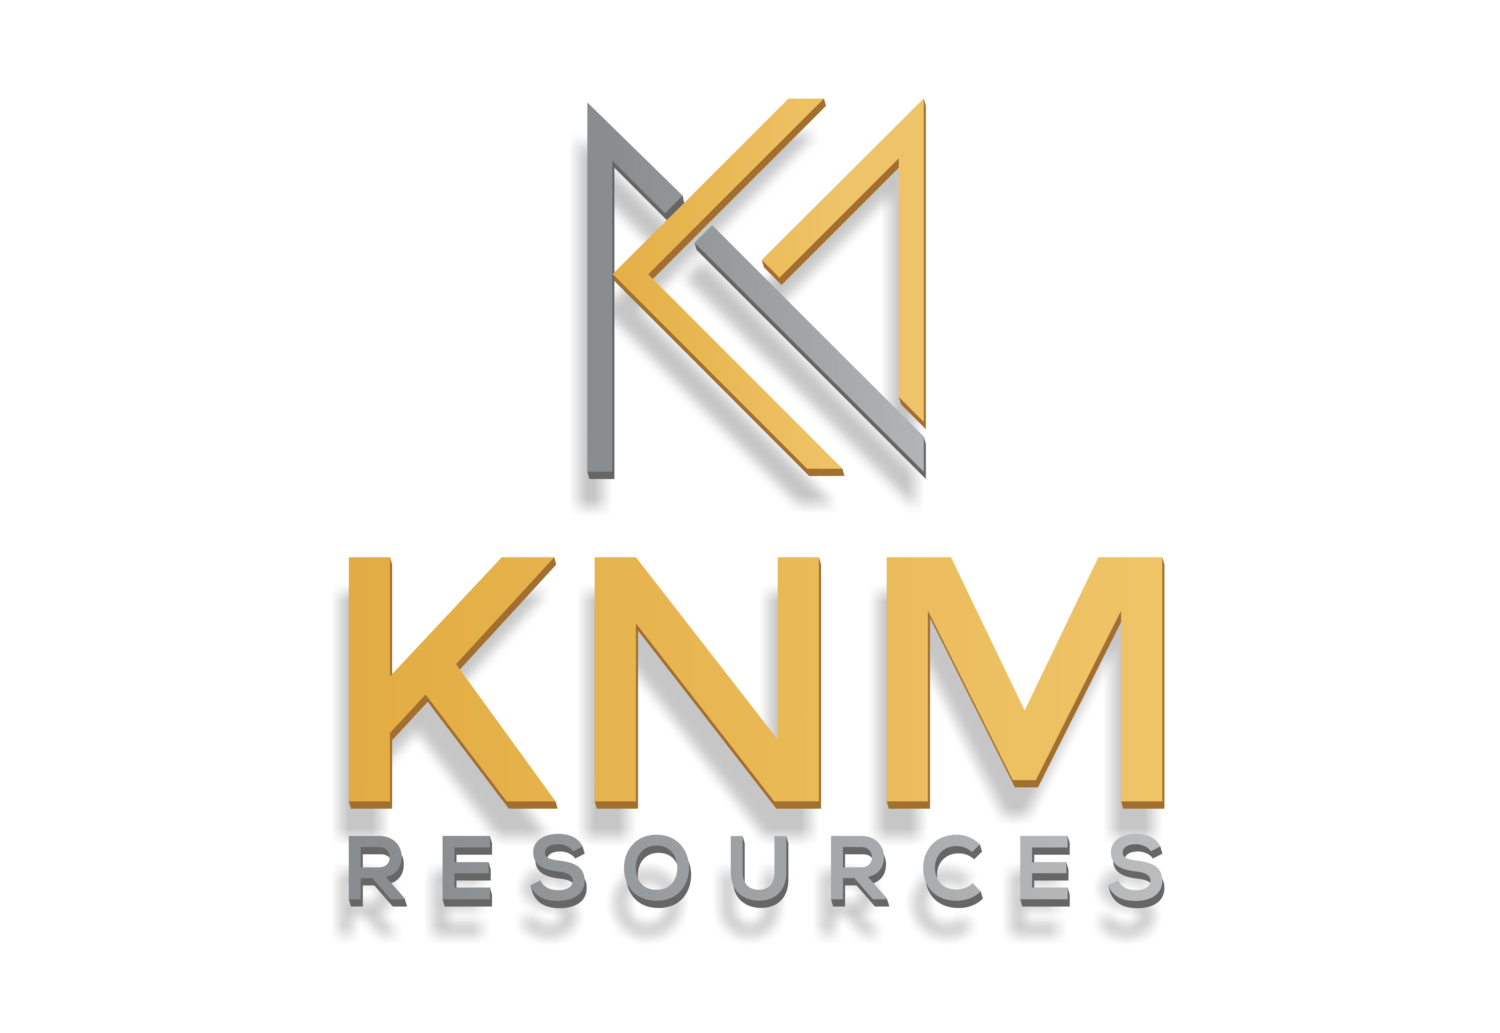 KNM Resources